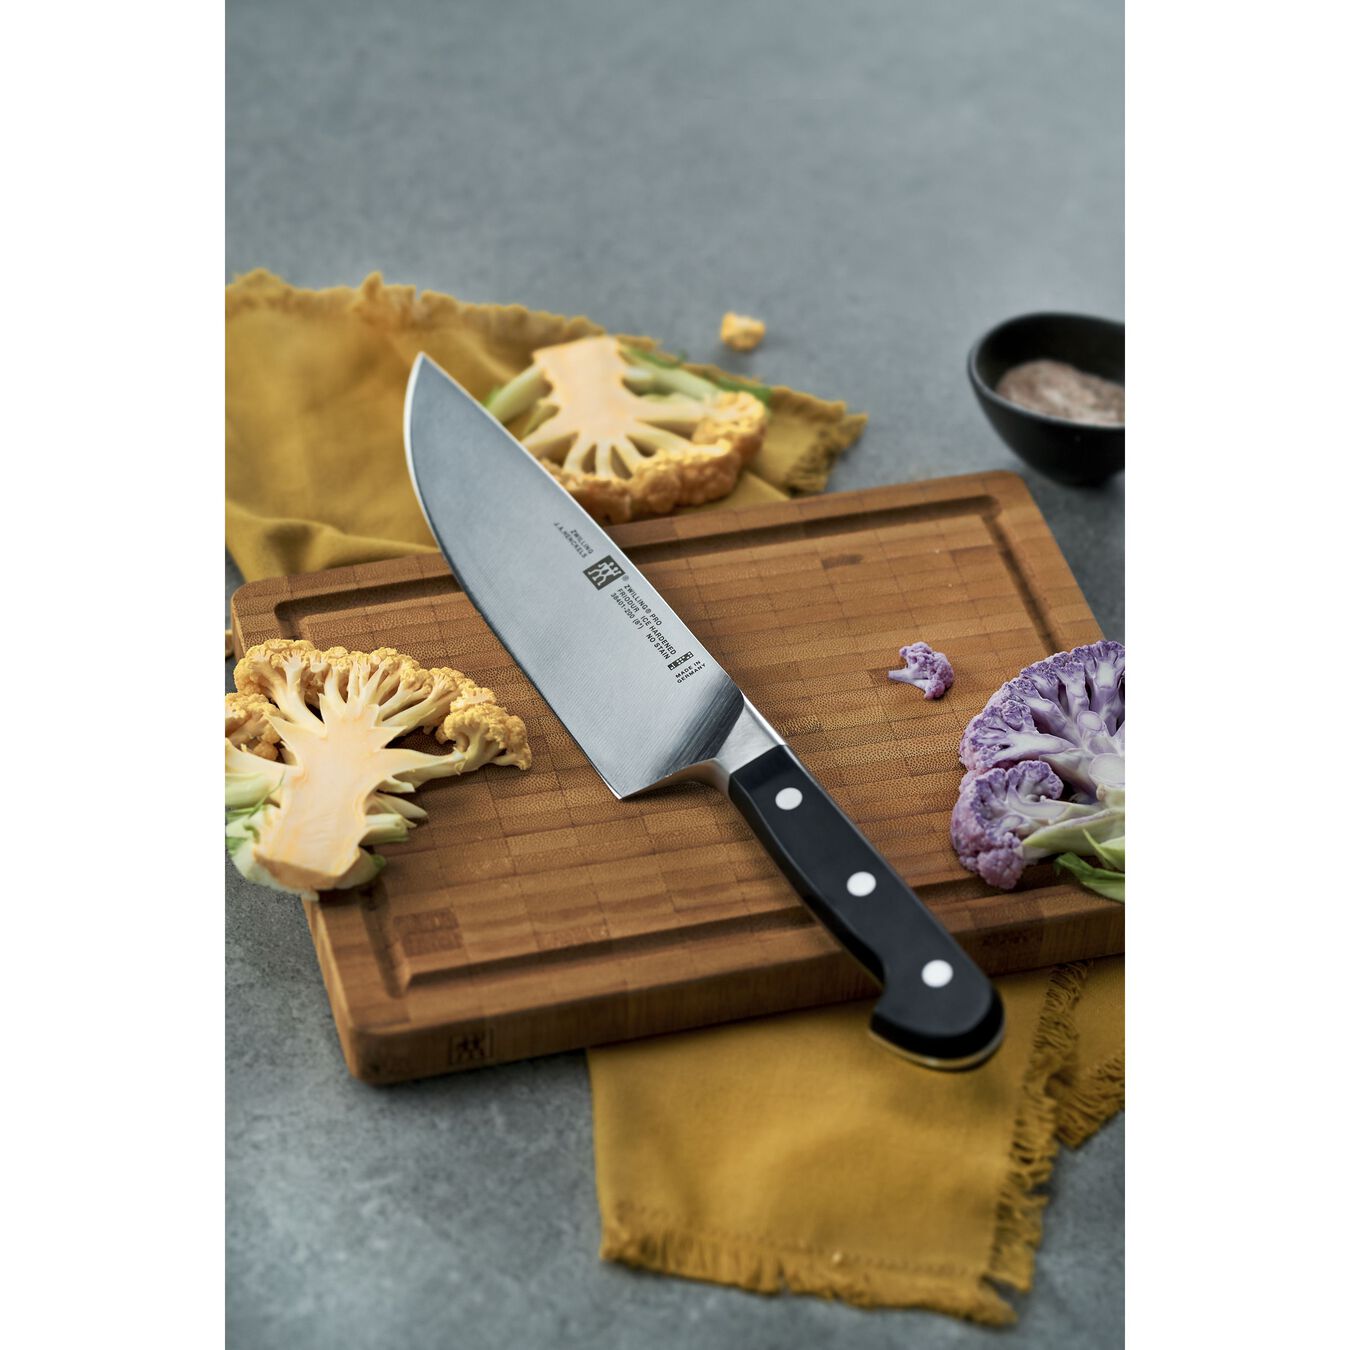 Buy ZWILLING Pro Chef's knife   ZWILLING.COM